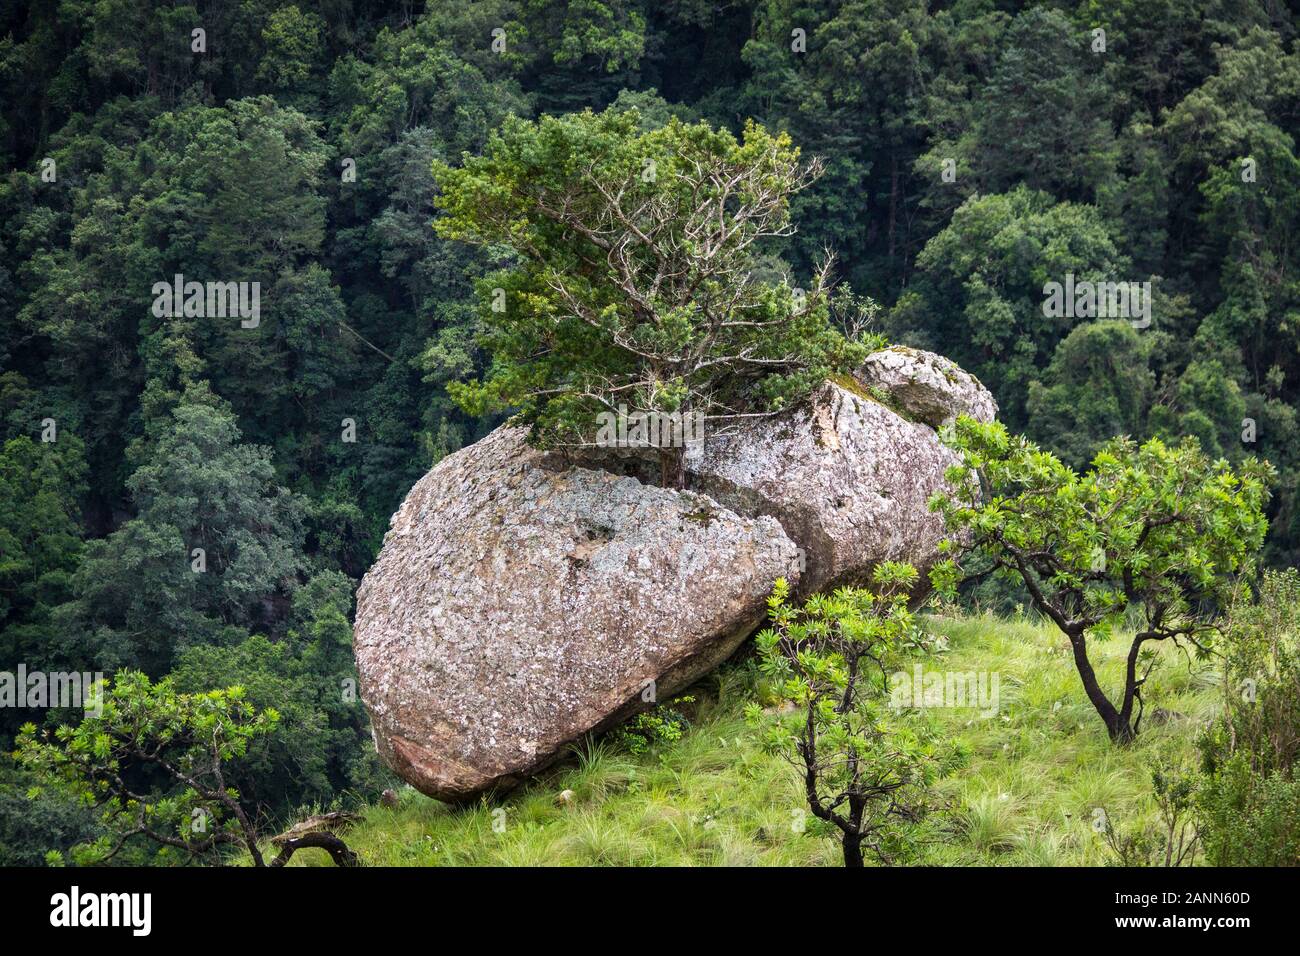 A tree grows out of a crevice of a boulder Stock Photo